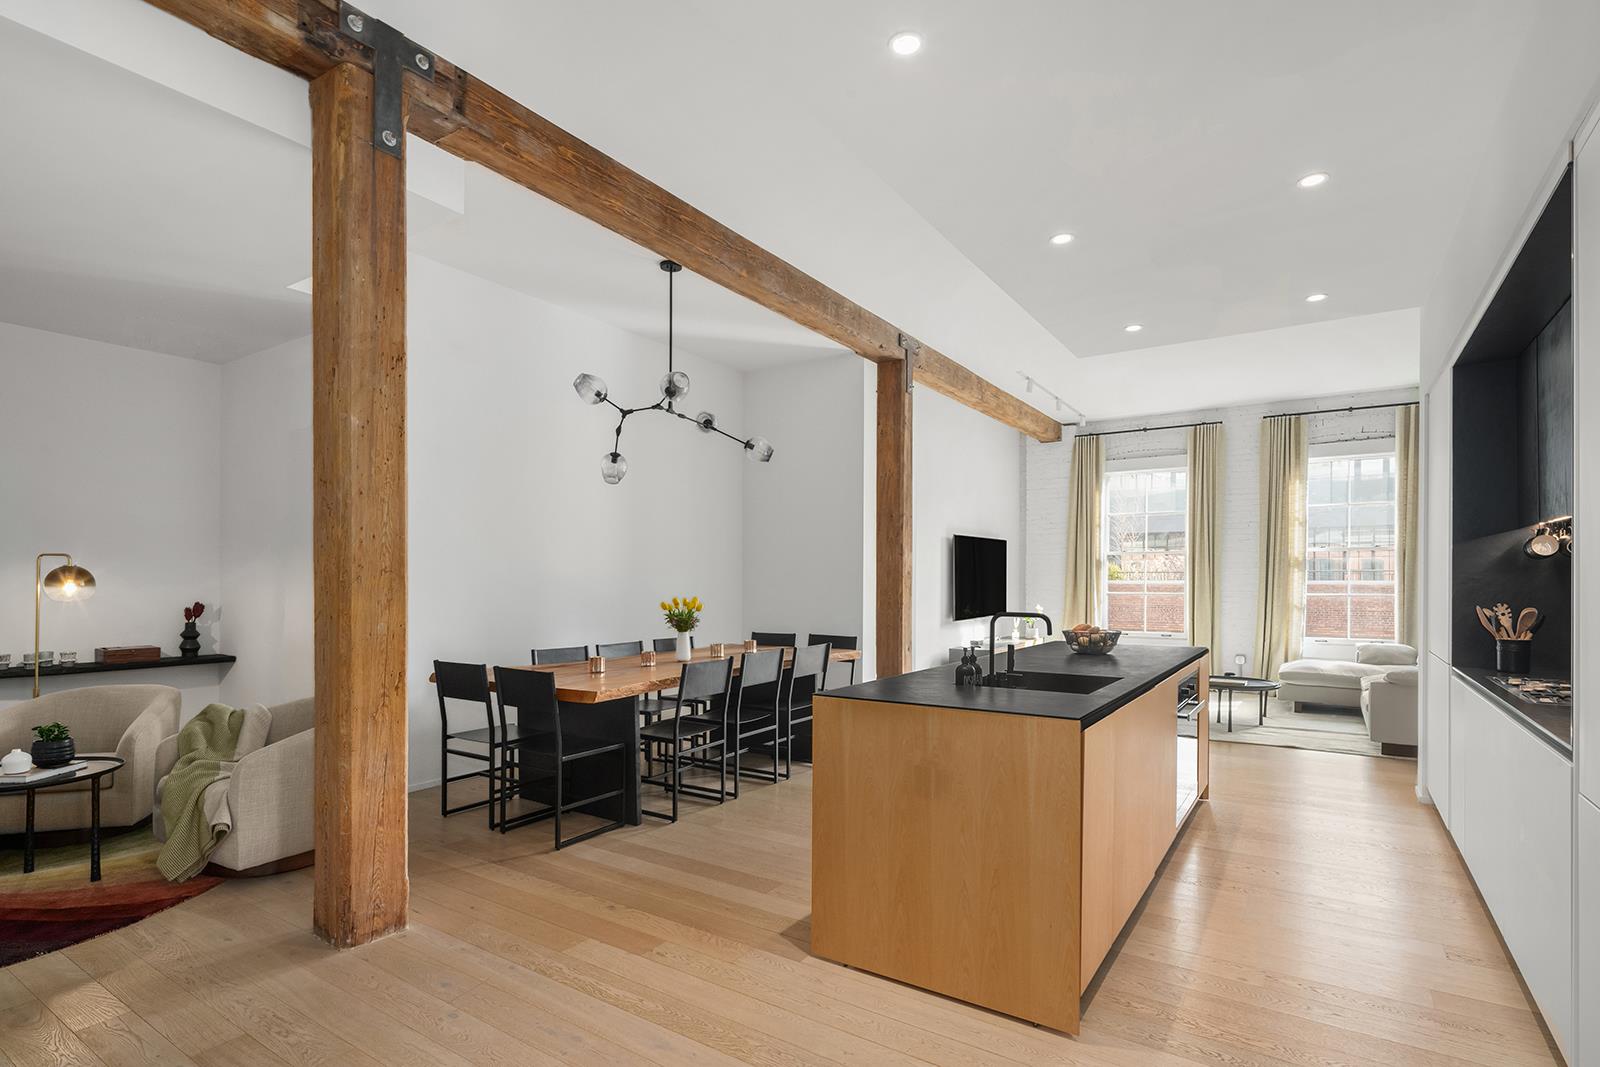 168 Plymouth Street 6E, Dumbo, Brooklyn, New York - 2 Bedrooms  
3 Bathrooms  
5 Rooms - 